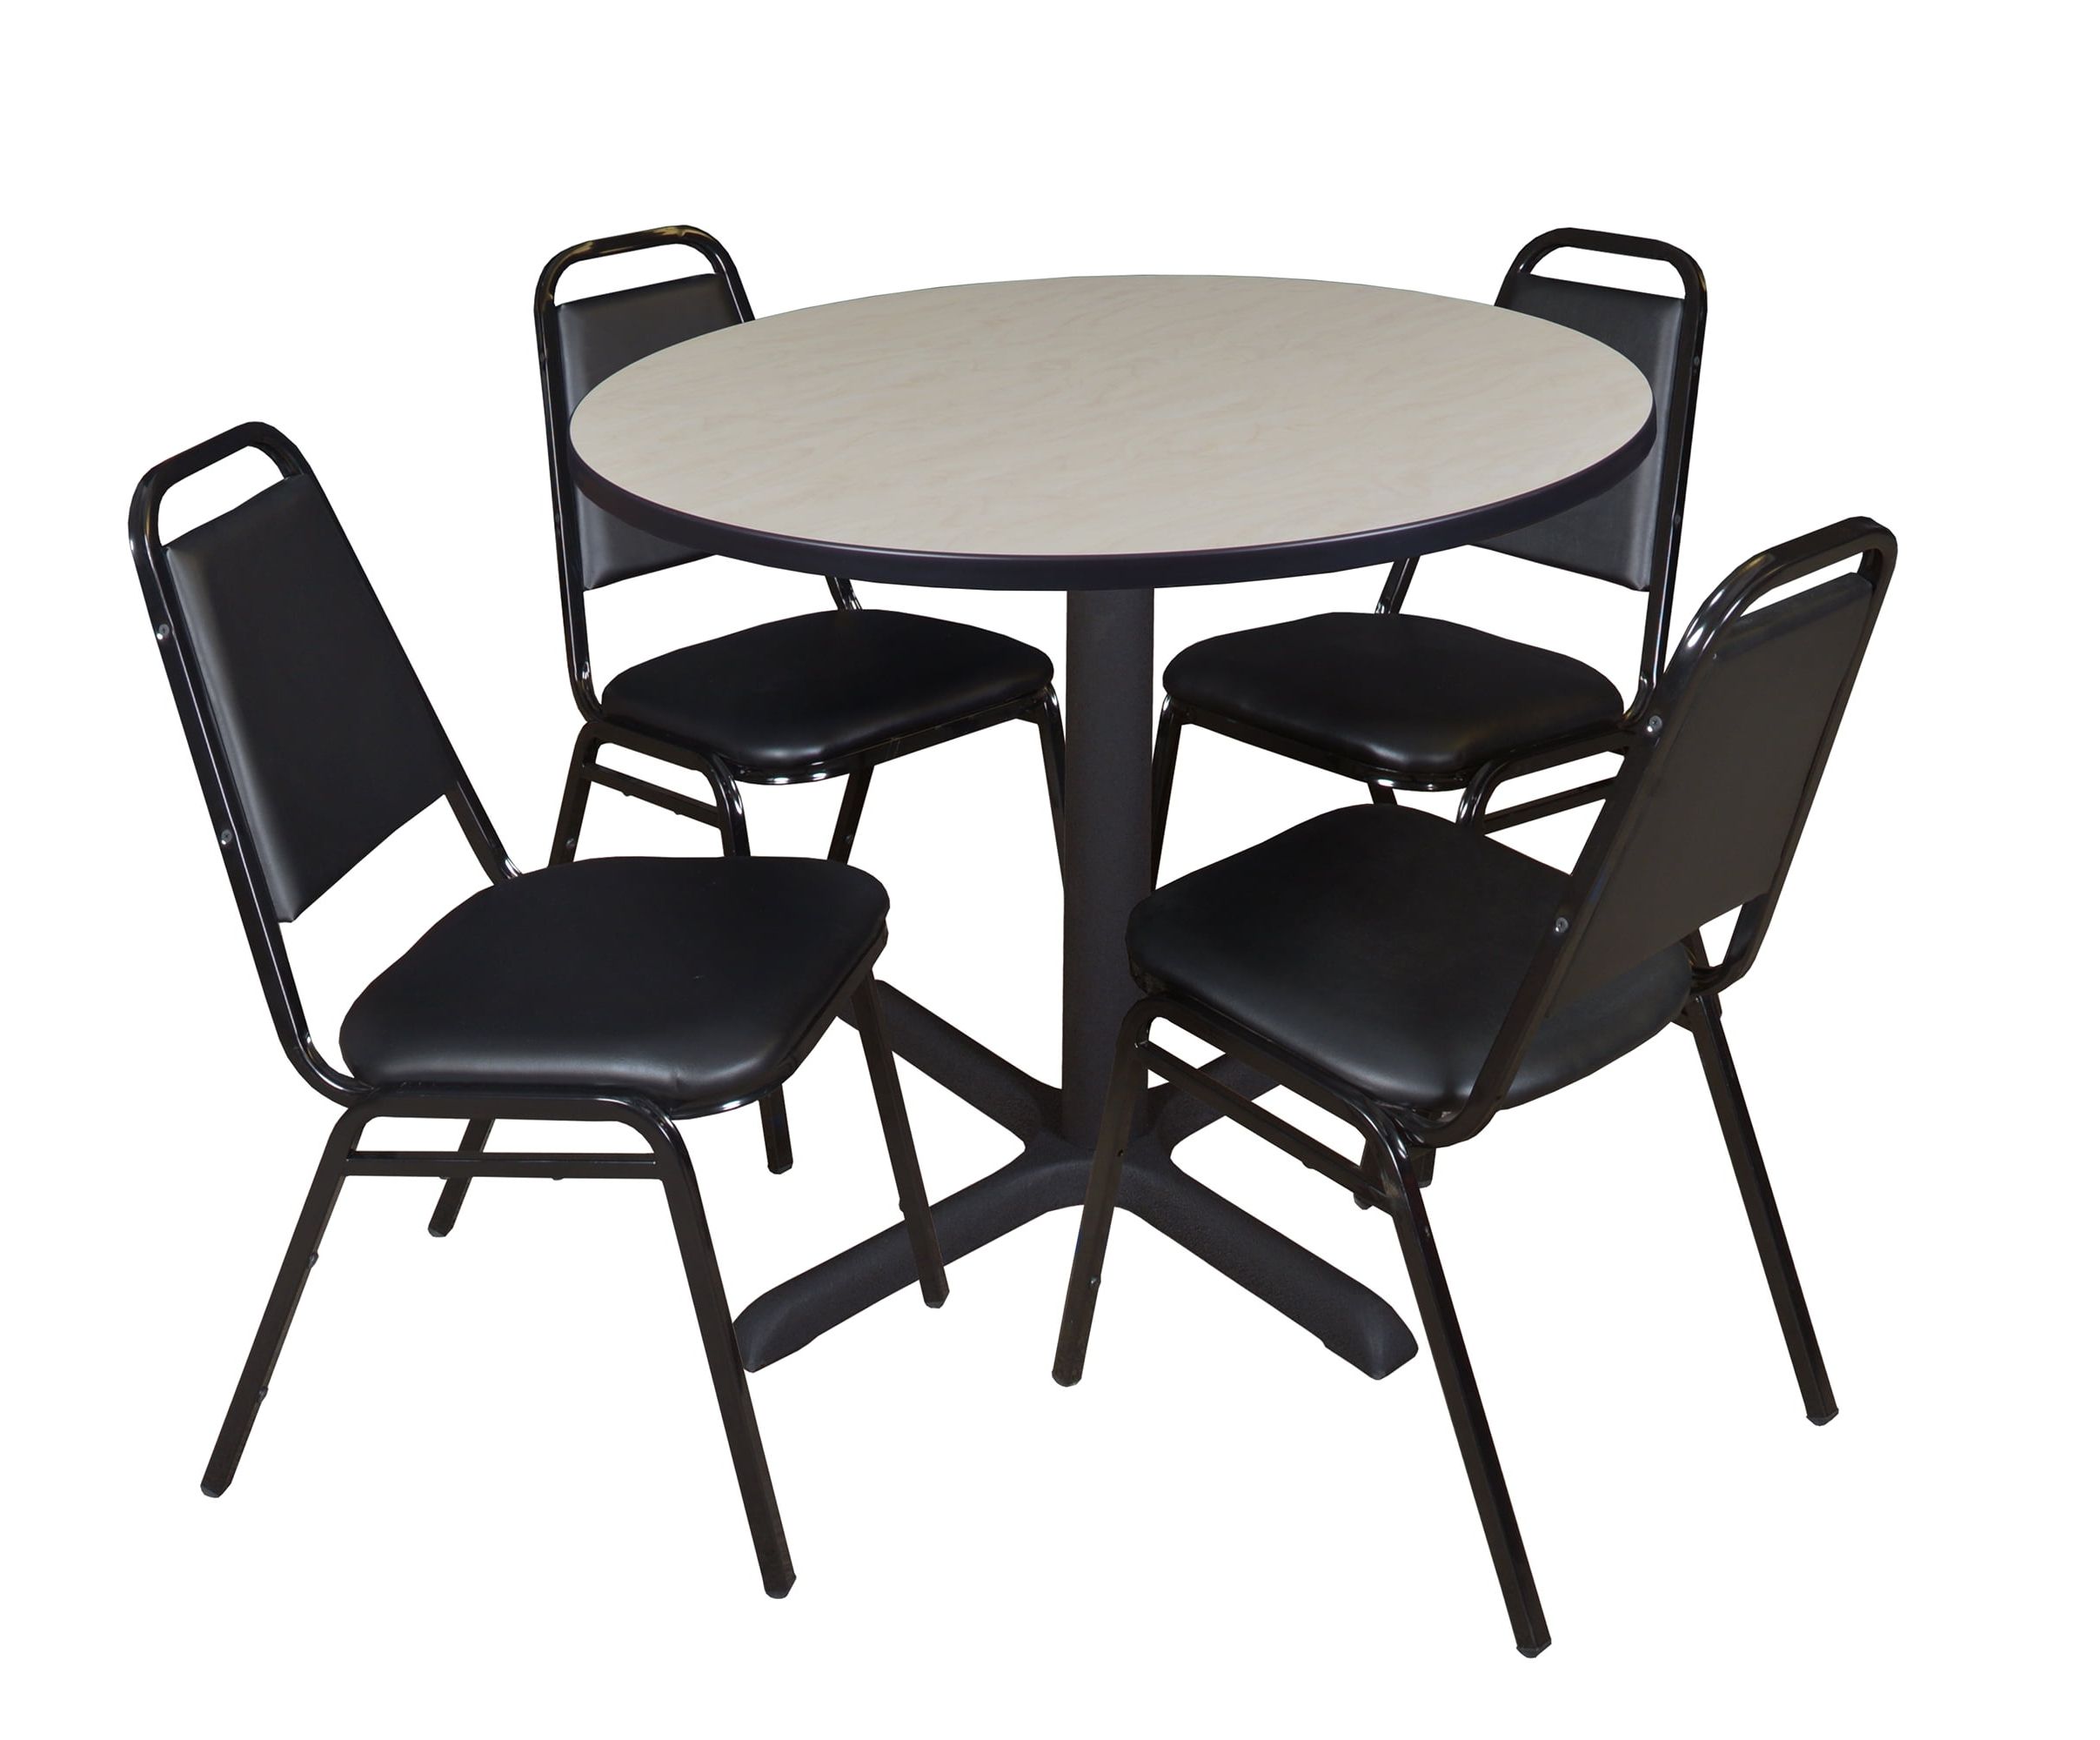 Regency Cain Round Breakroom Table With 4 Stackable Restaurant Chairs Pertaining To Regency Cain Steel Coffee Tables (View 16 of 20)